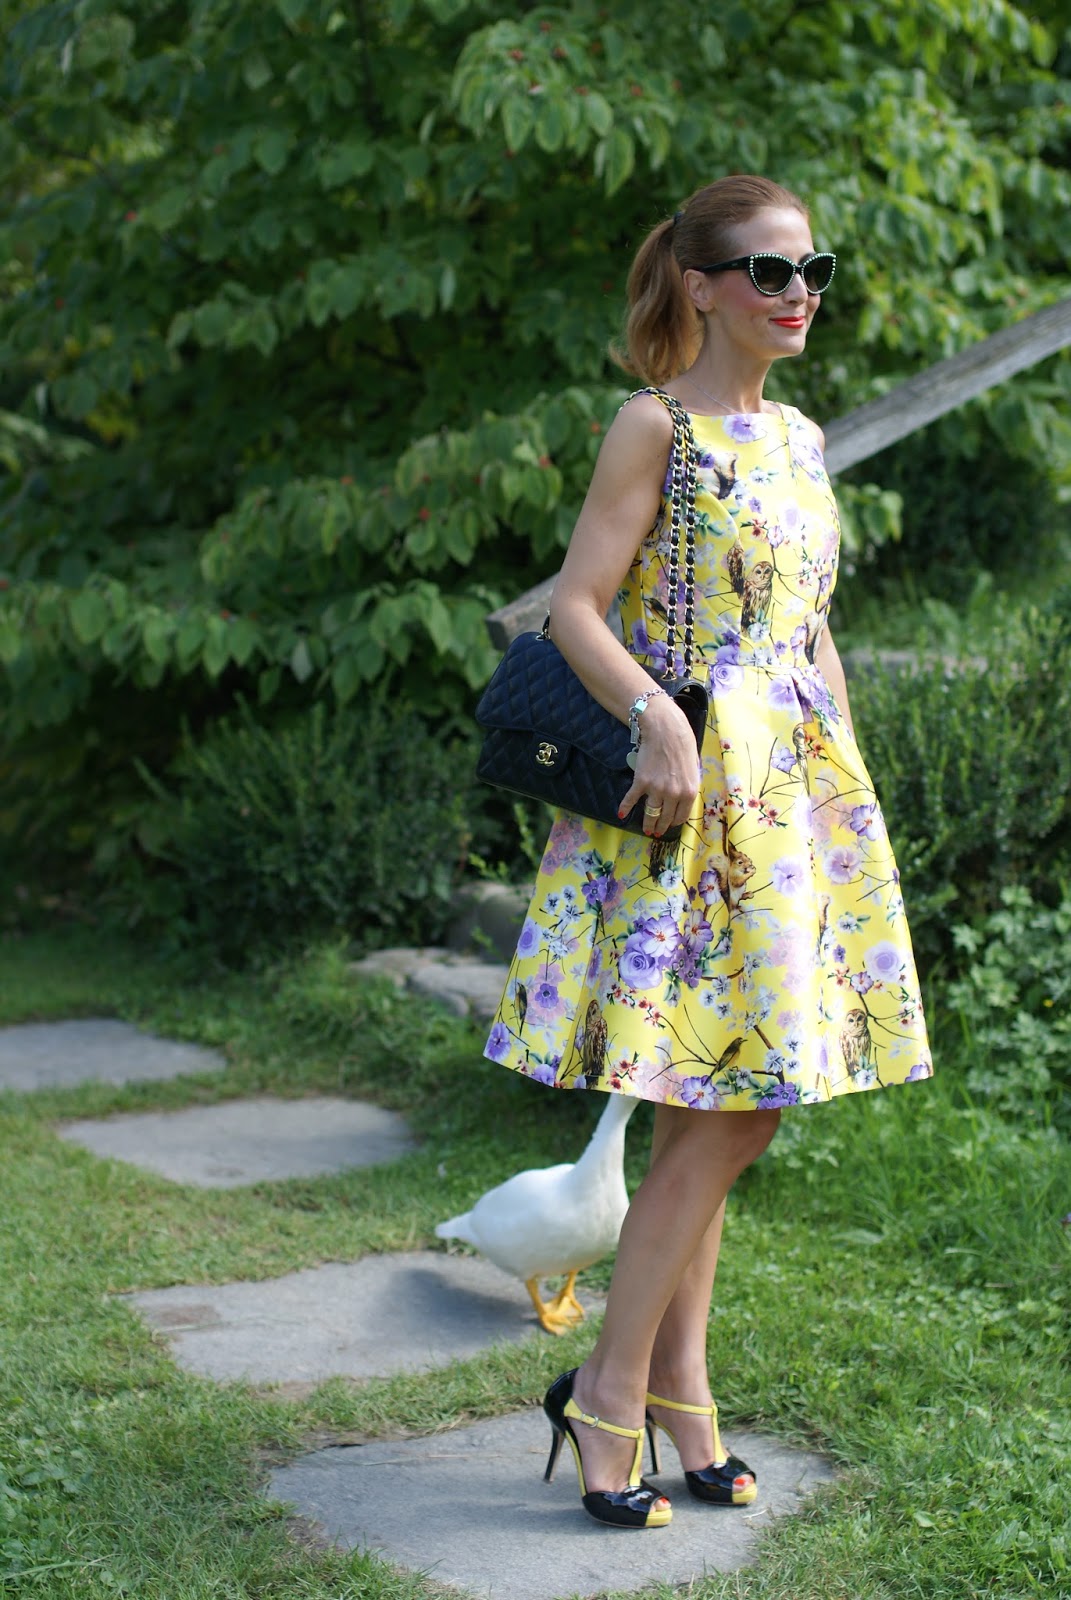 Fashion blogger meets ducks: girly and chic outfit | Fashion and ...